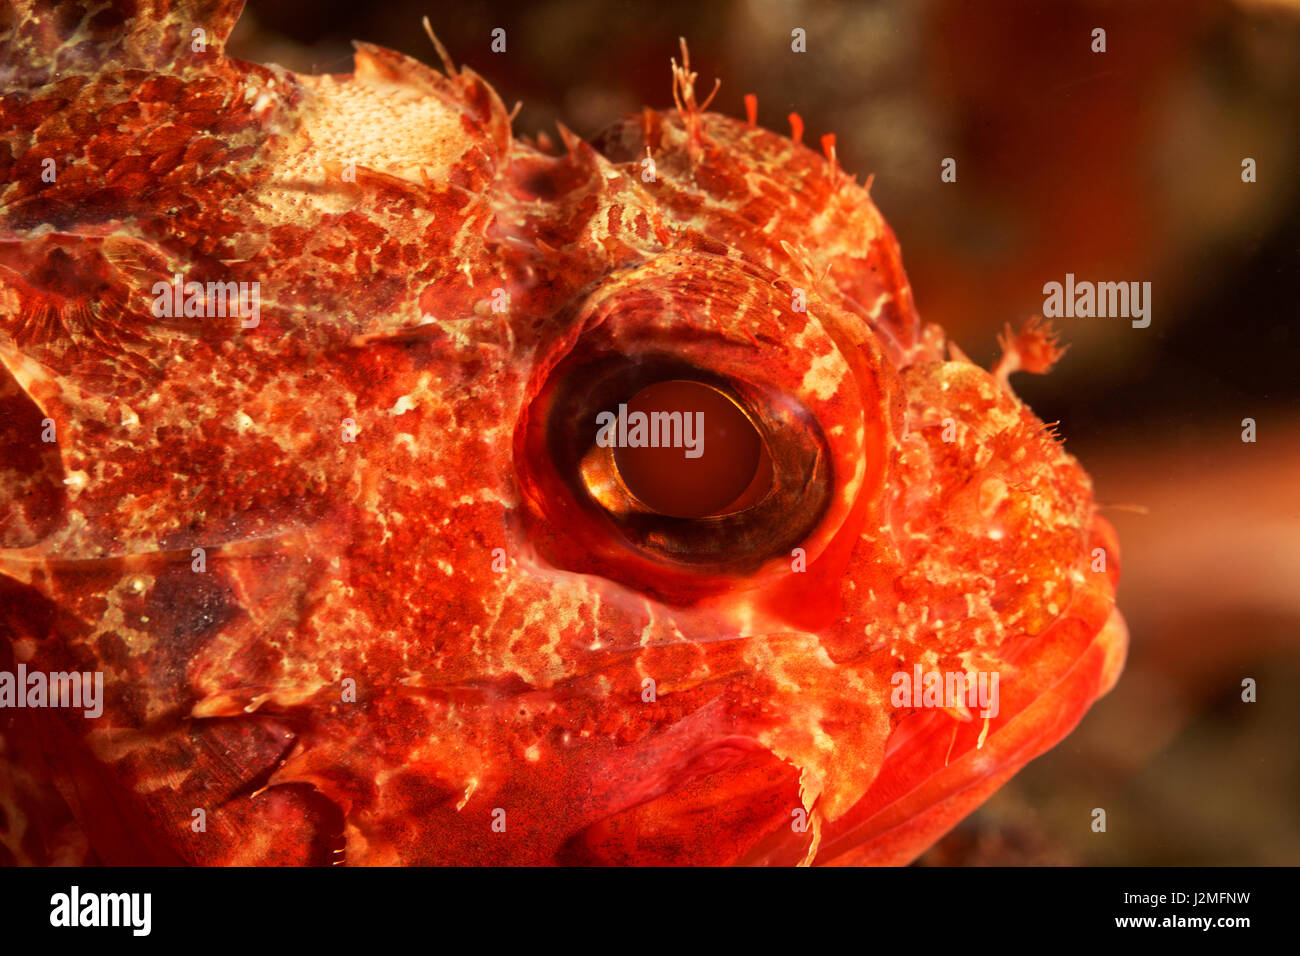 Small red scorpionfish from Pag, Adriatic Sea Stock Photo